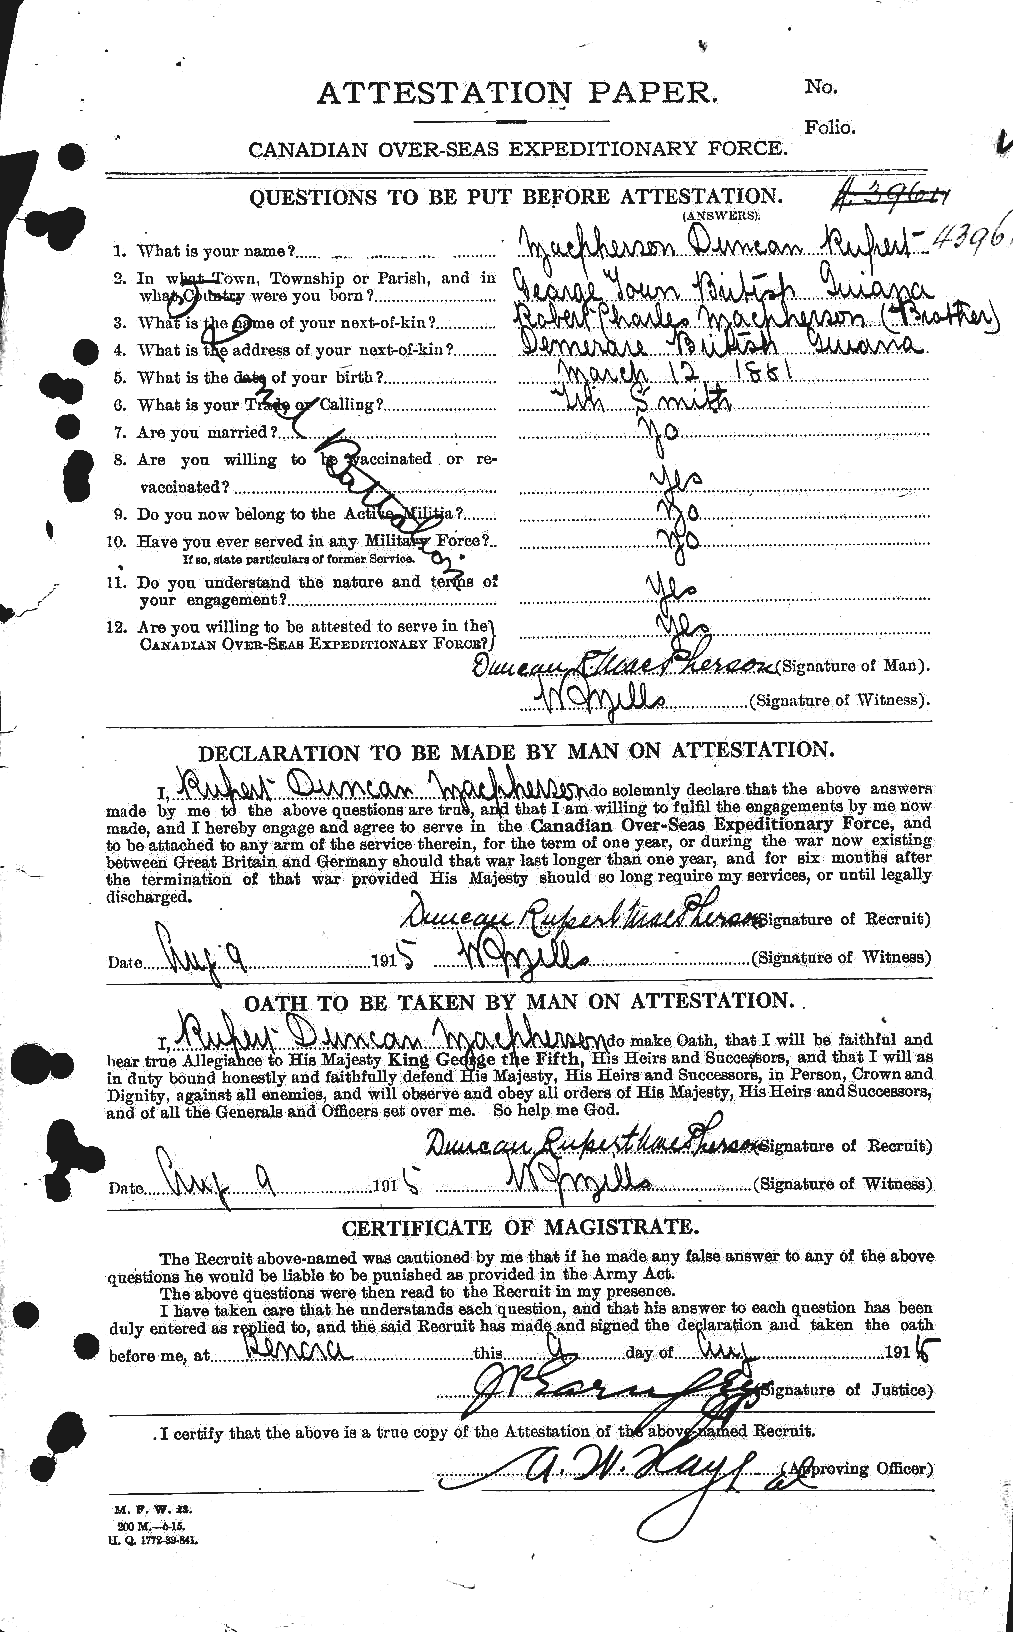 Personnel Records of the First World War - CEF 541517a